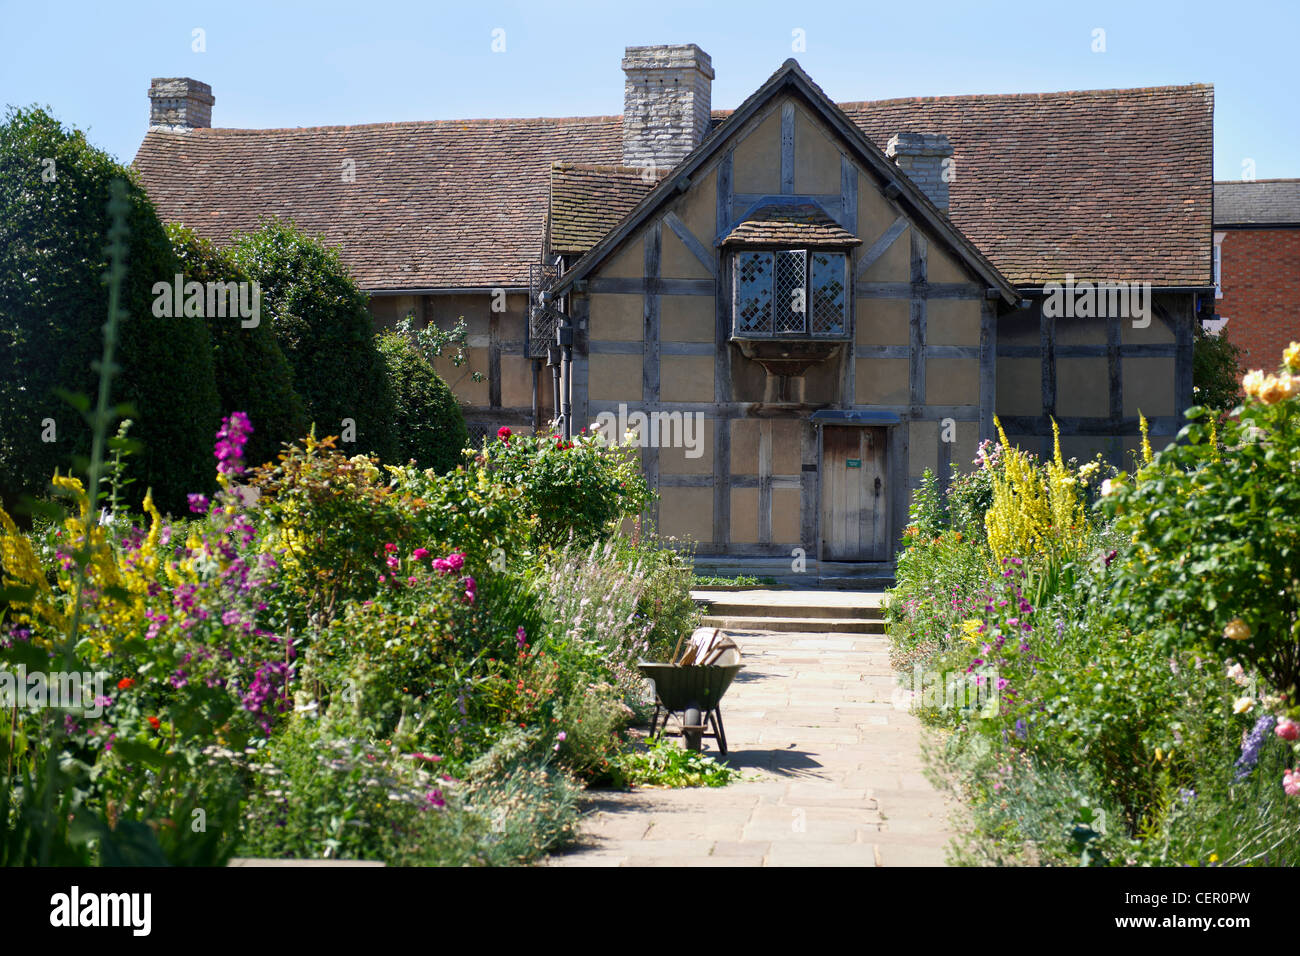 William Shakespeare's Birthplace and Garden in Henley Street, the most famous and most visited literary landmark in Britain. The Stock Photo